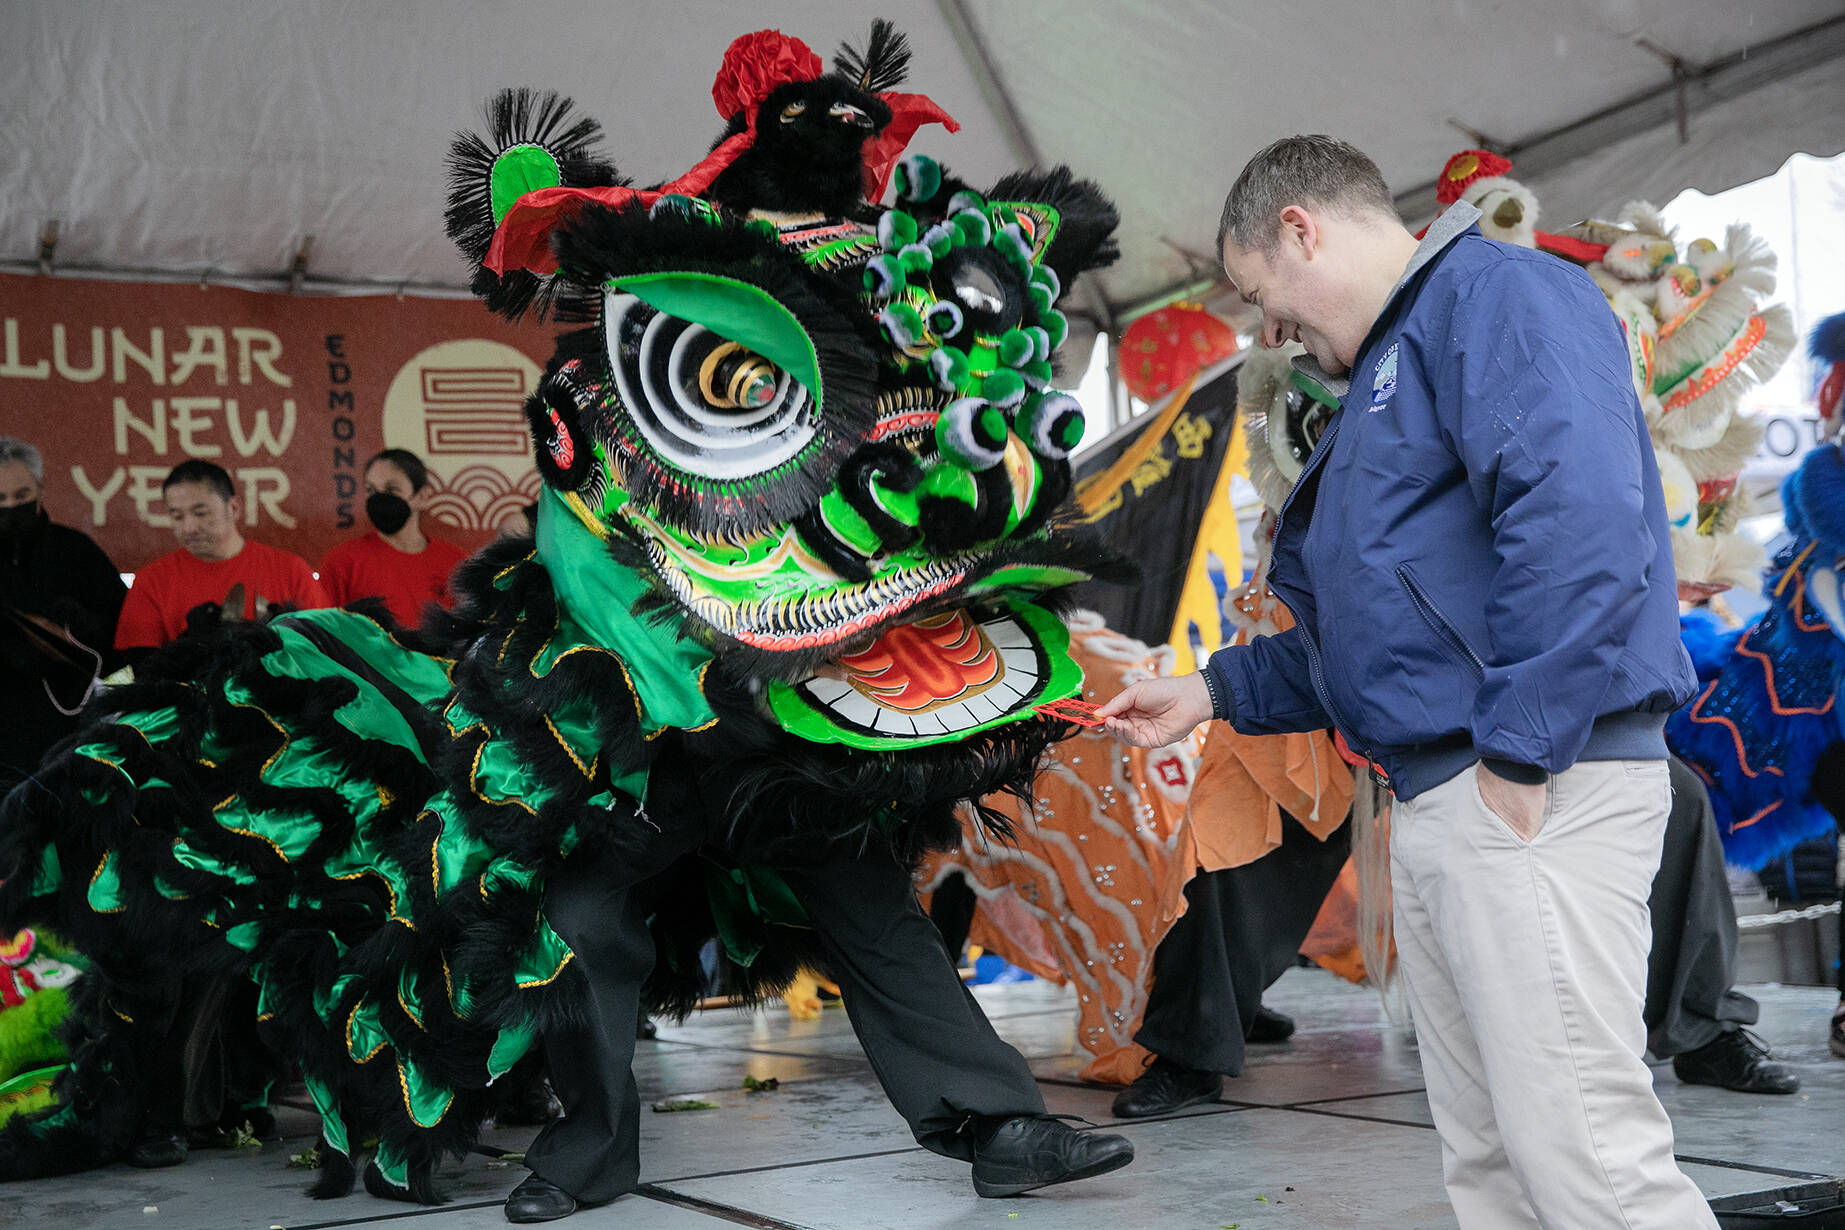 Photo by Ryan Berry / The Herald
Edmonds Mayor Mike Nelson rewards a lion dancer with a traditional red envelope during a celebration of the Lunar New Year on Saturday, Jan. 21, 2023.